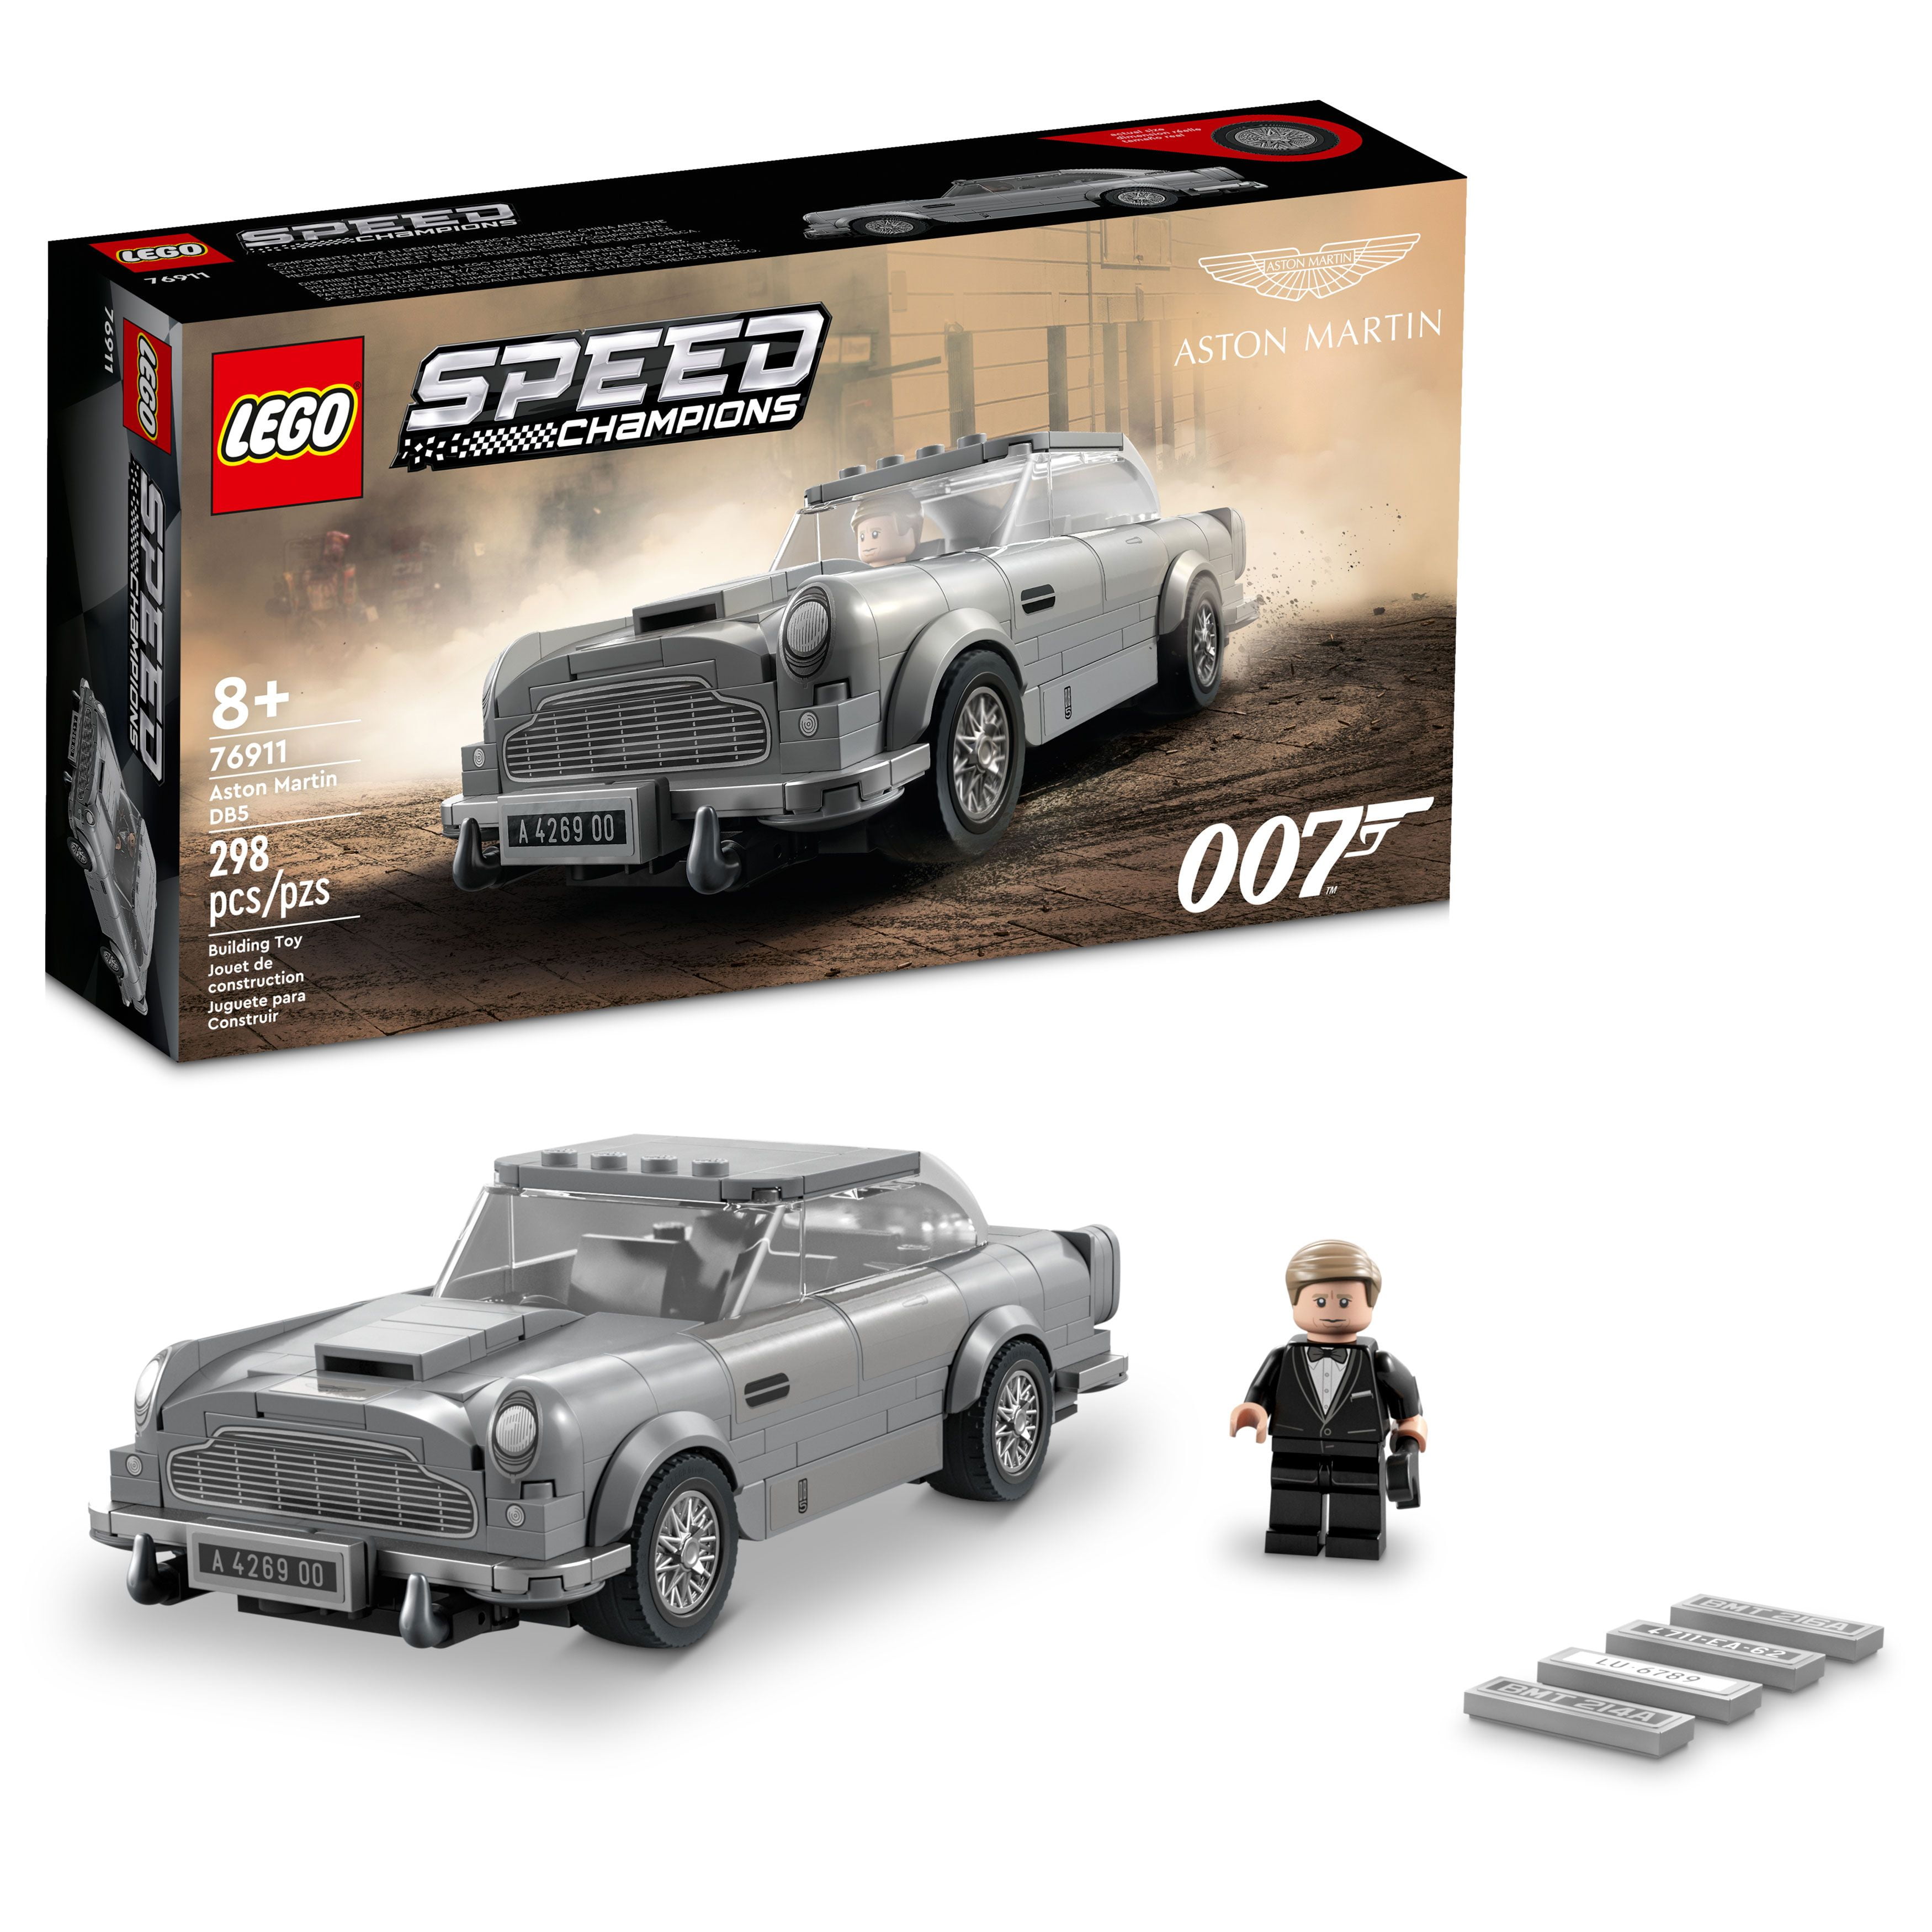 Lego Speed Champions 007 Aston Martin Db5 76911 Building Toy Set Featuring  James Bond Minifigure, Car Model Kit For Kids And Teens, Great Gift For  Boys And Girls Ages 8 And Up - Walmart.Com